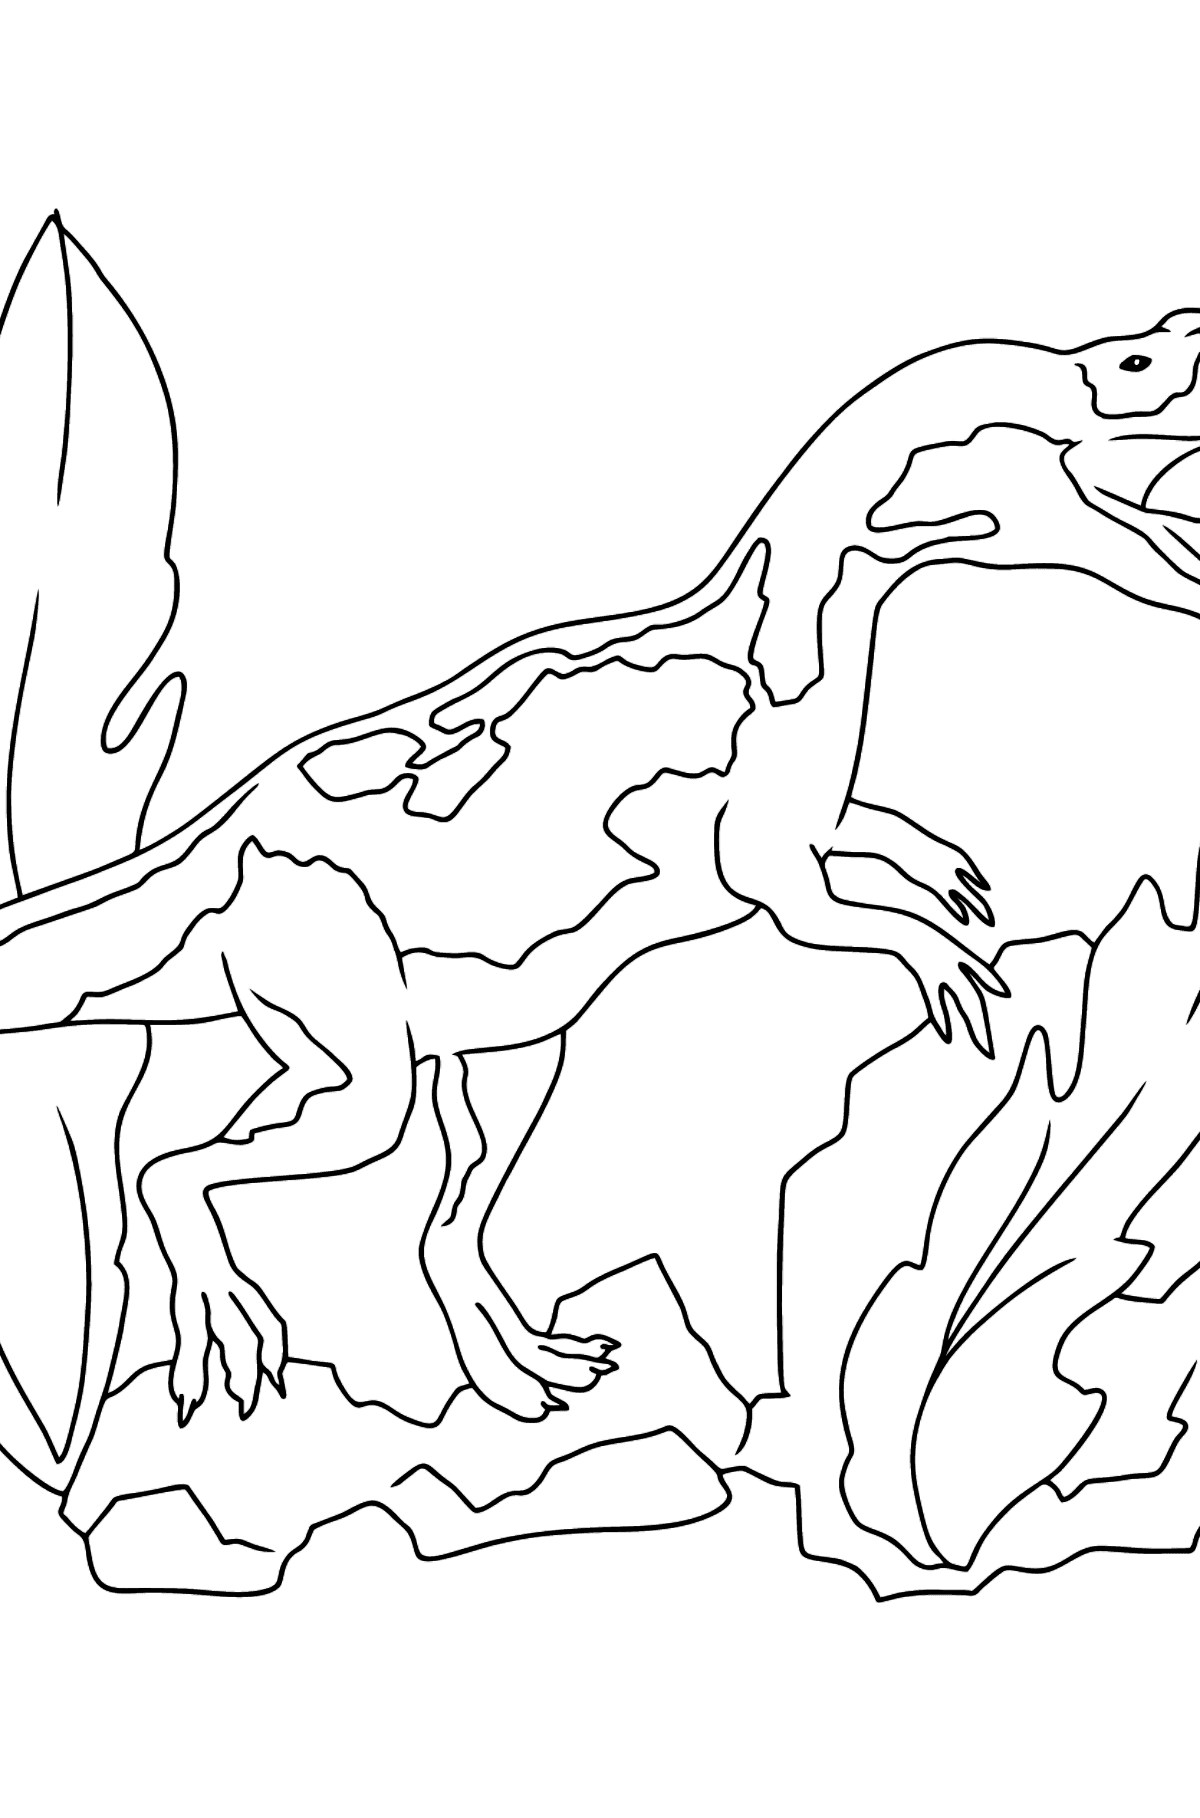 Coloring Page - A Dinosaur is Looking for Food - Coloring Pages for Kids